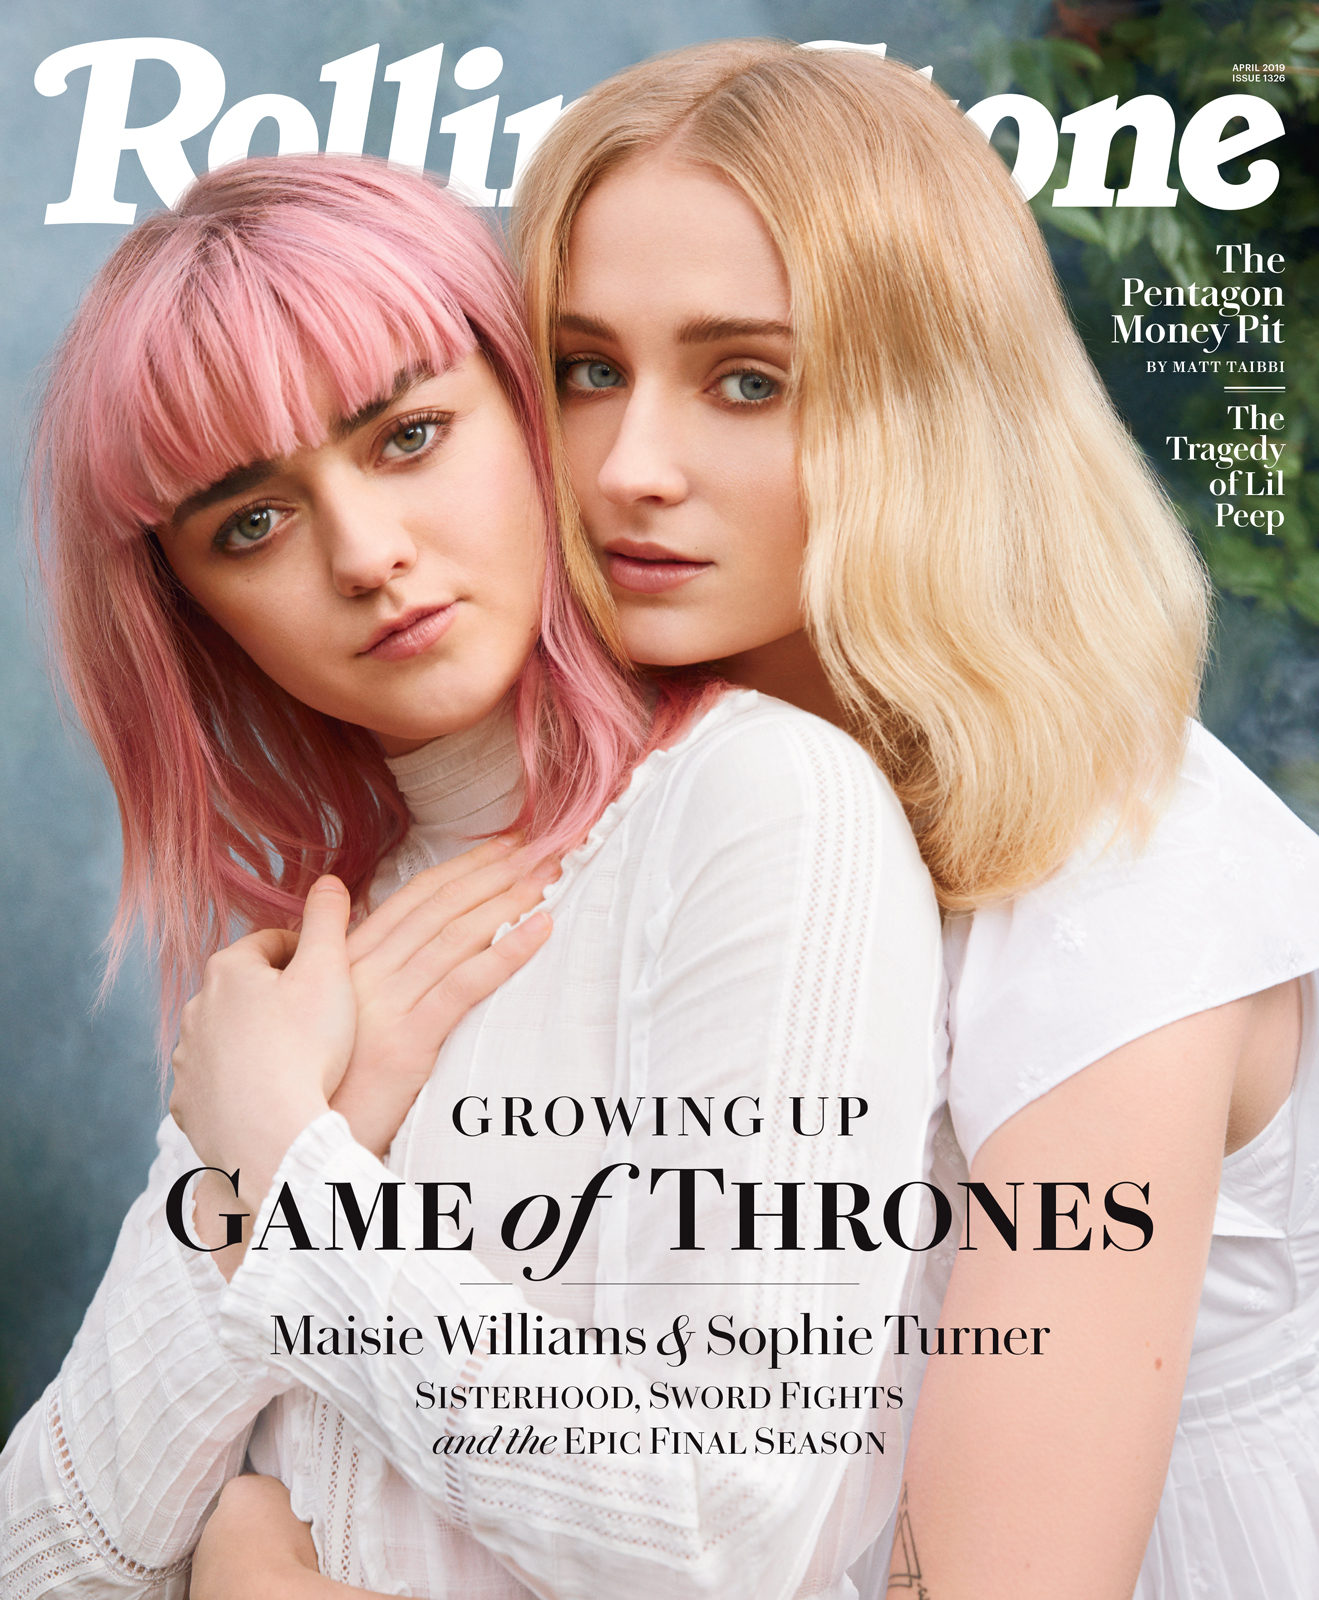 Maisie Williams Face 2019 Wallpapers